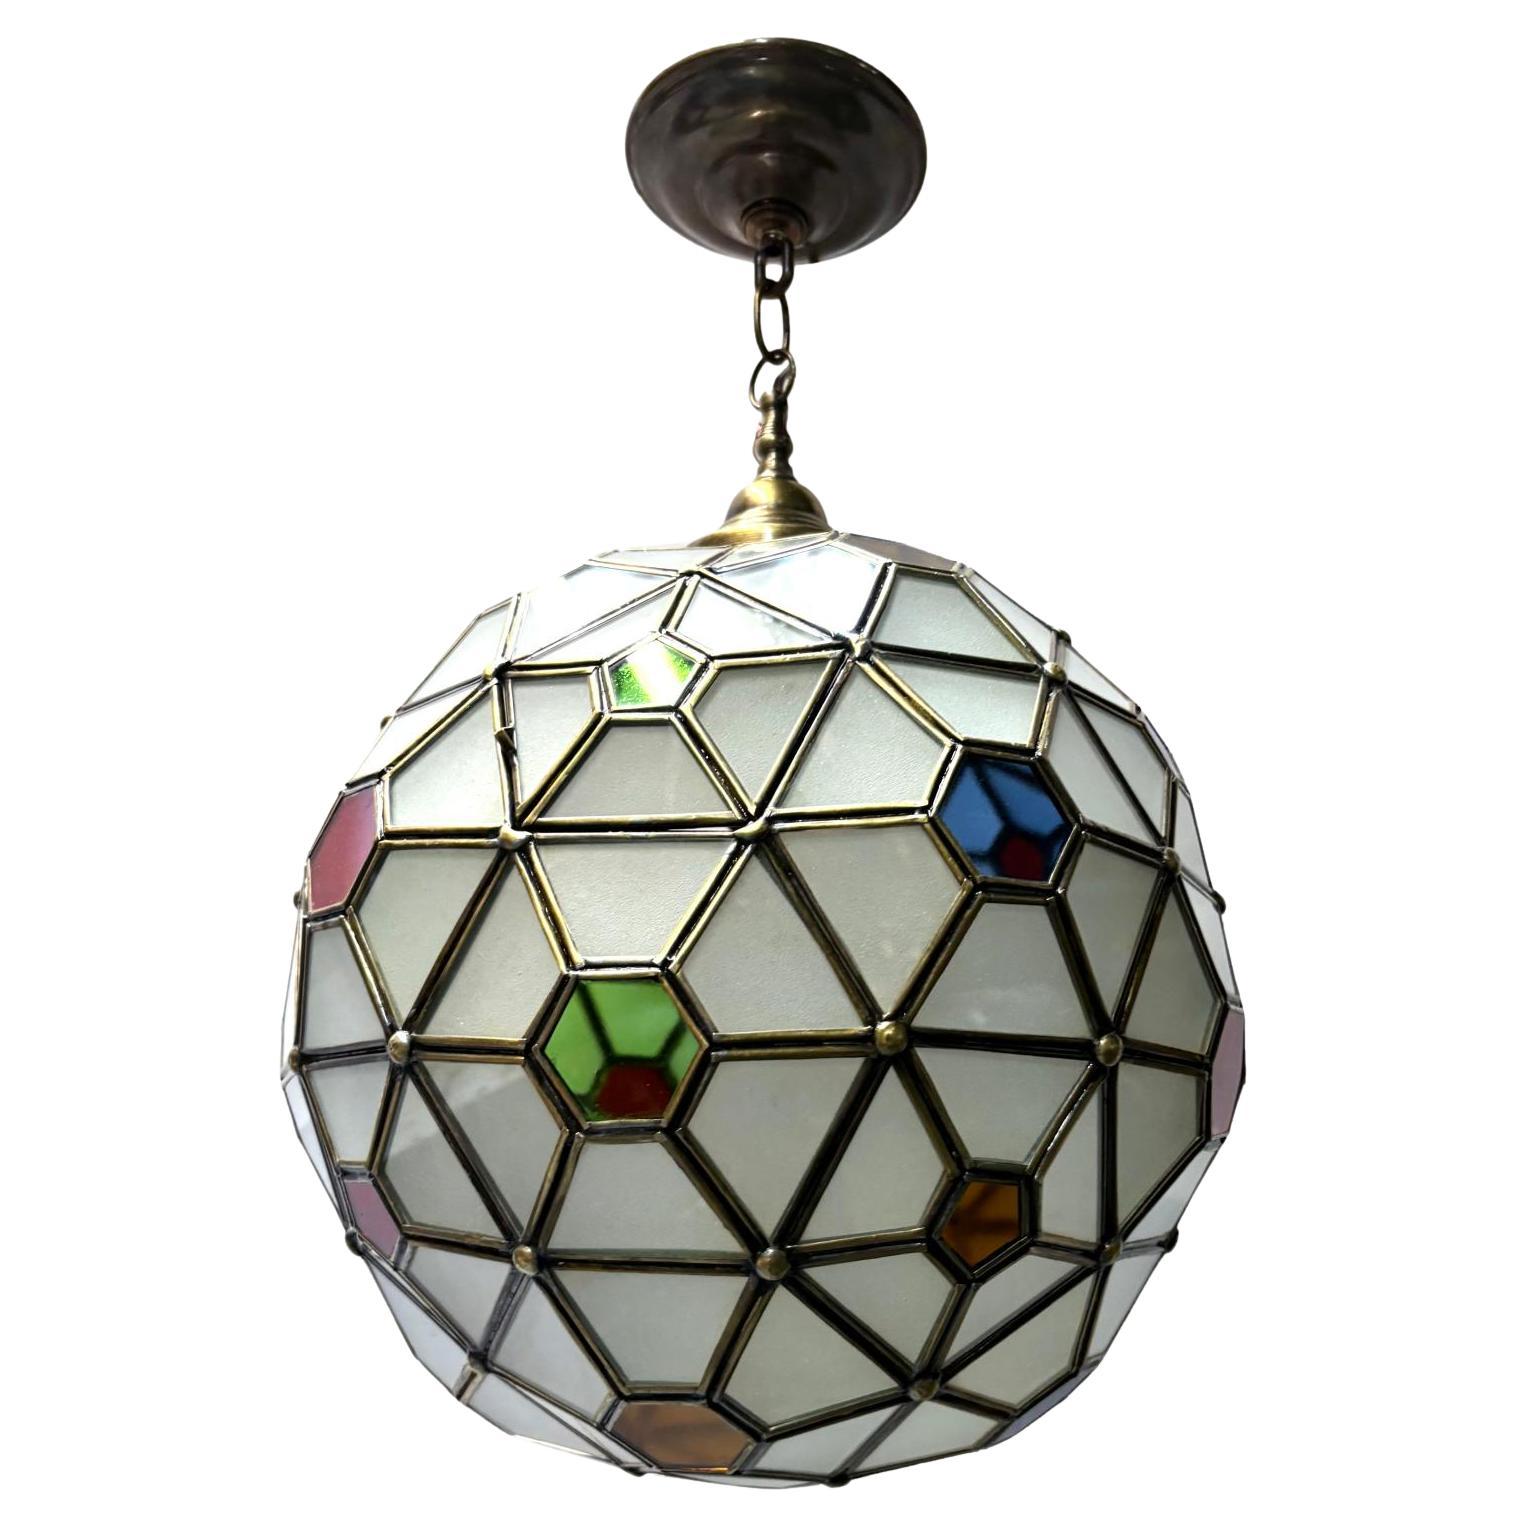 Vintage Moroccan Lantern with Color Glass Insets